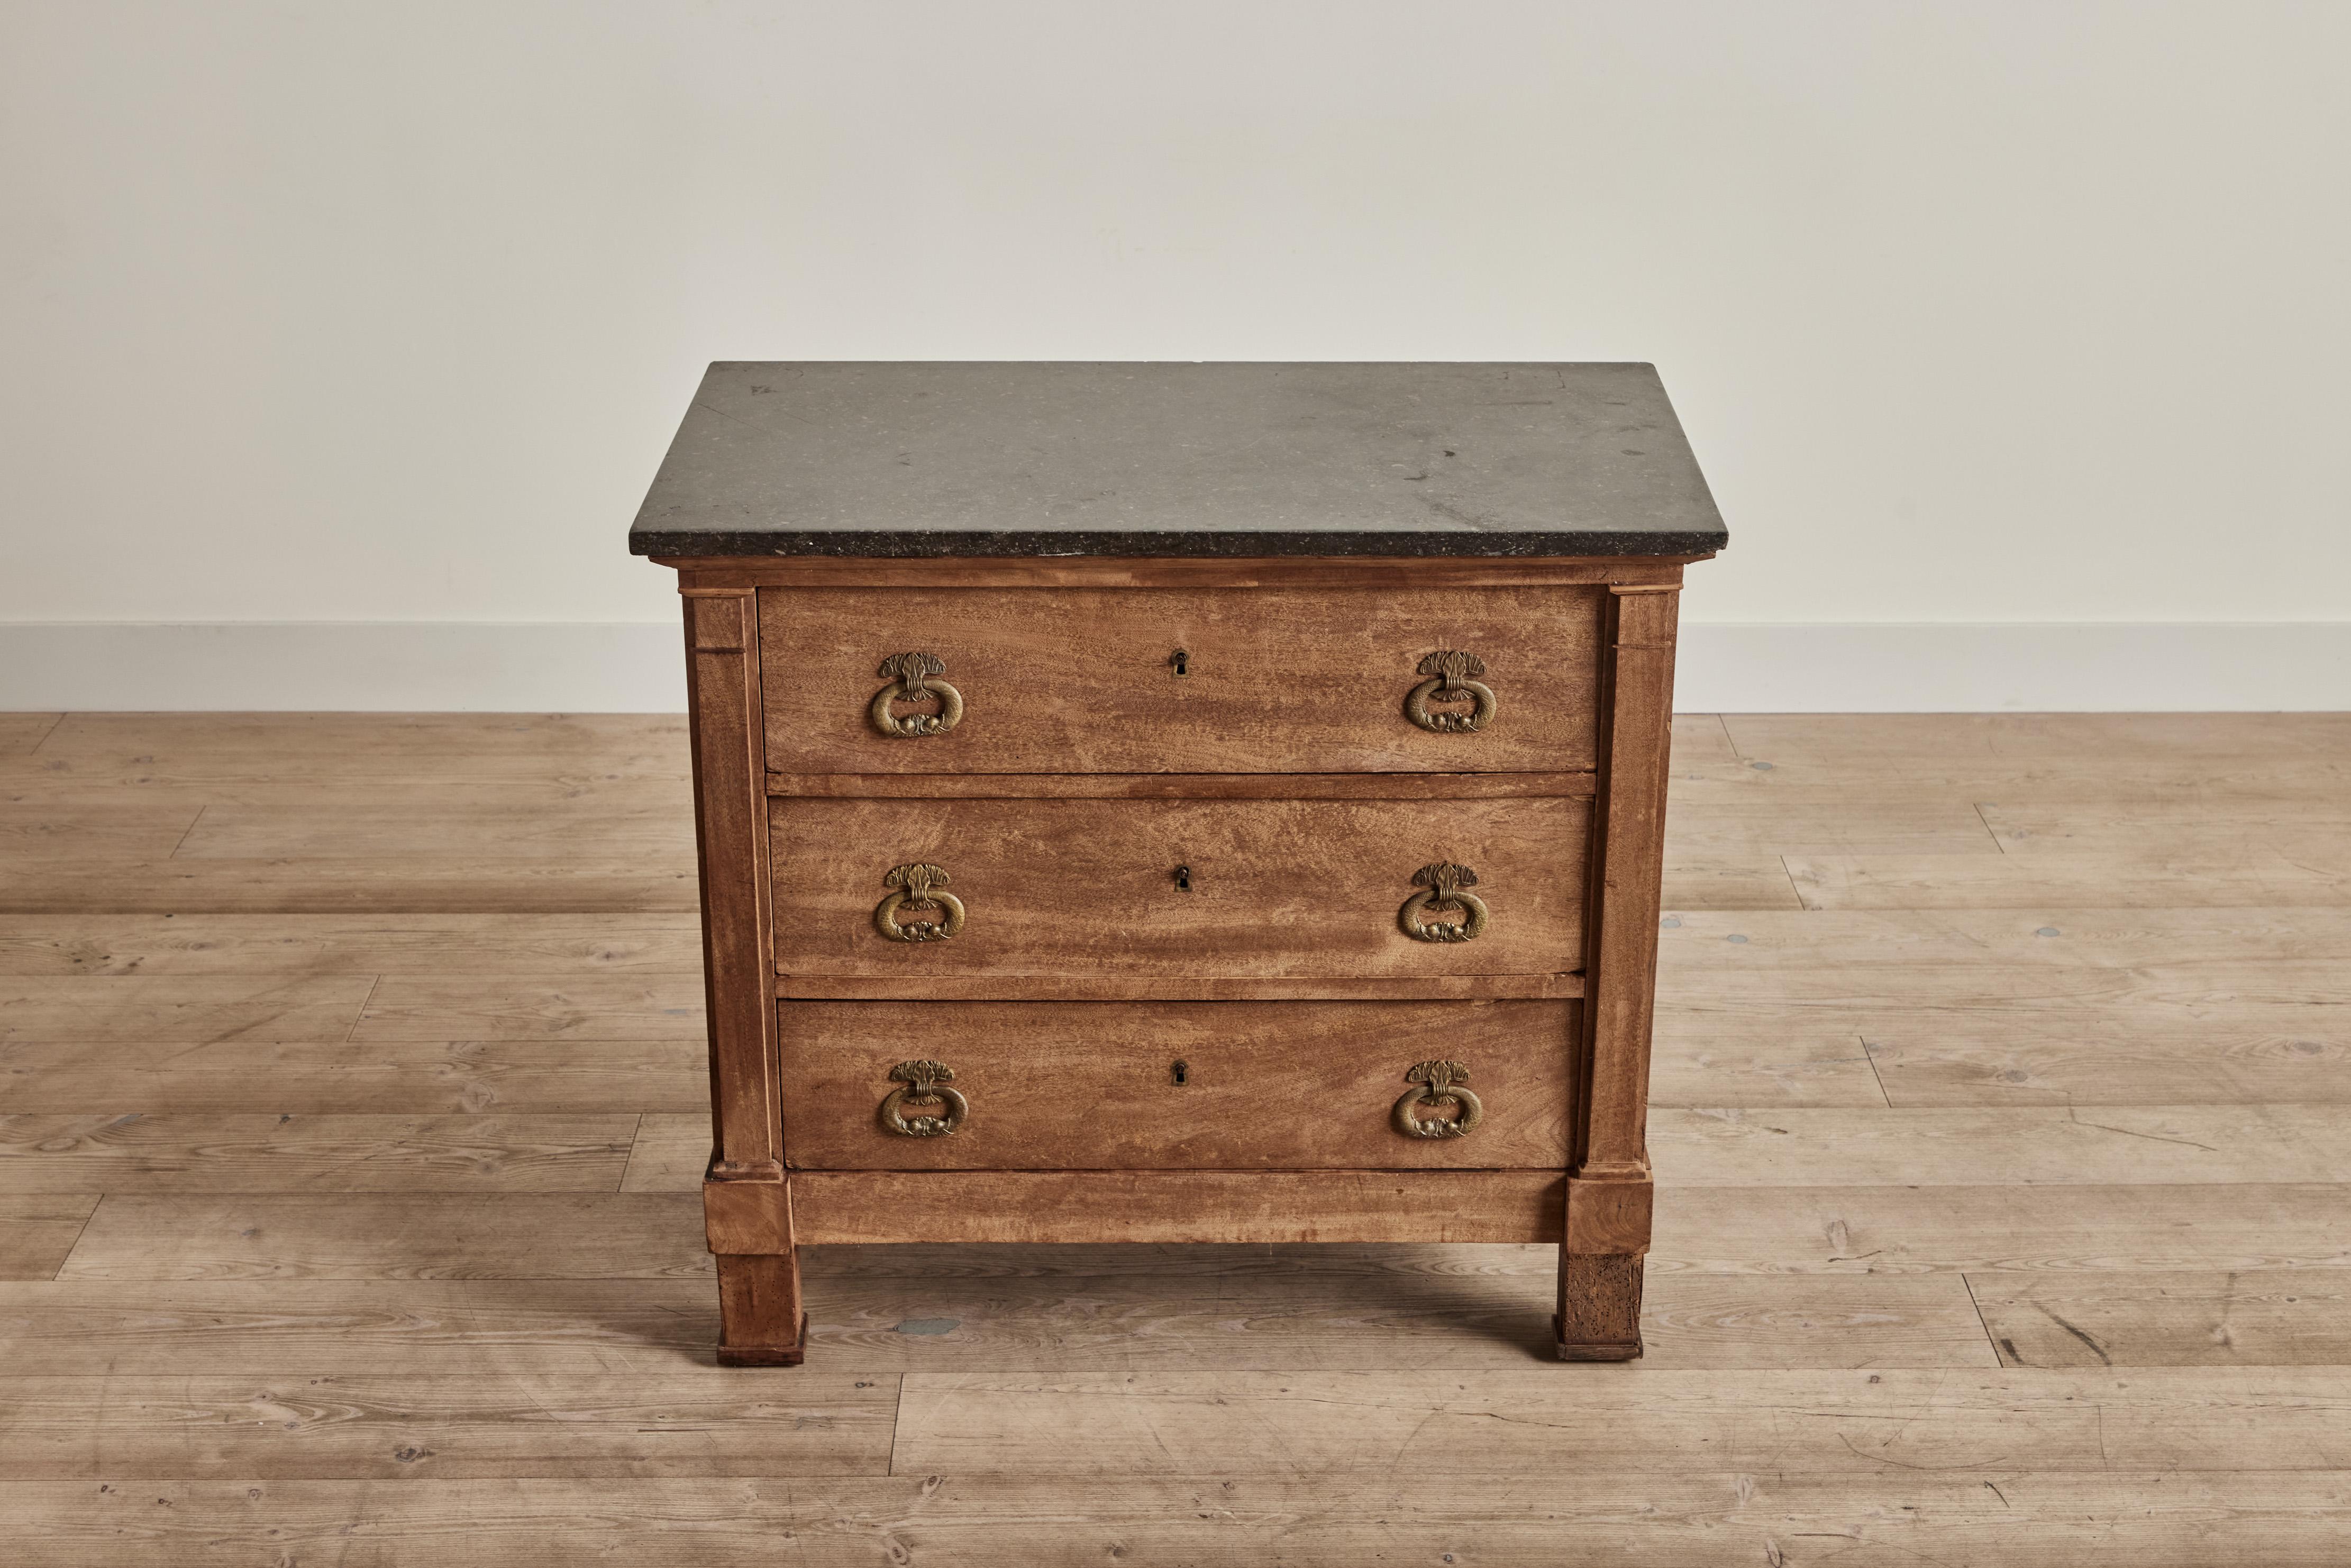 Nineteenth century marble top three drawer dresser from France. This dresser has distressed wood with a simple lines and raw finish. Wear throughout is consistent with age and use. 